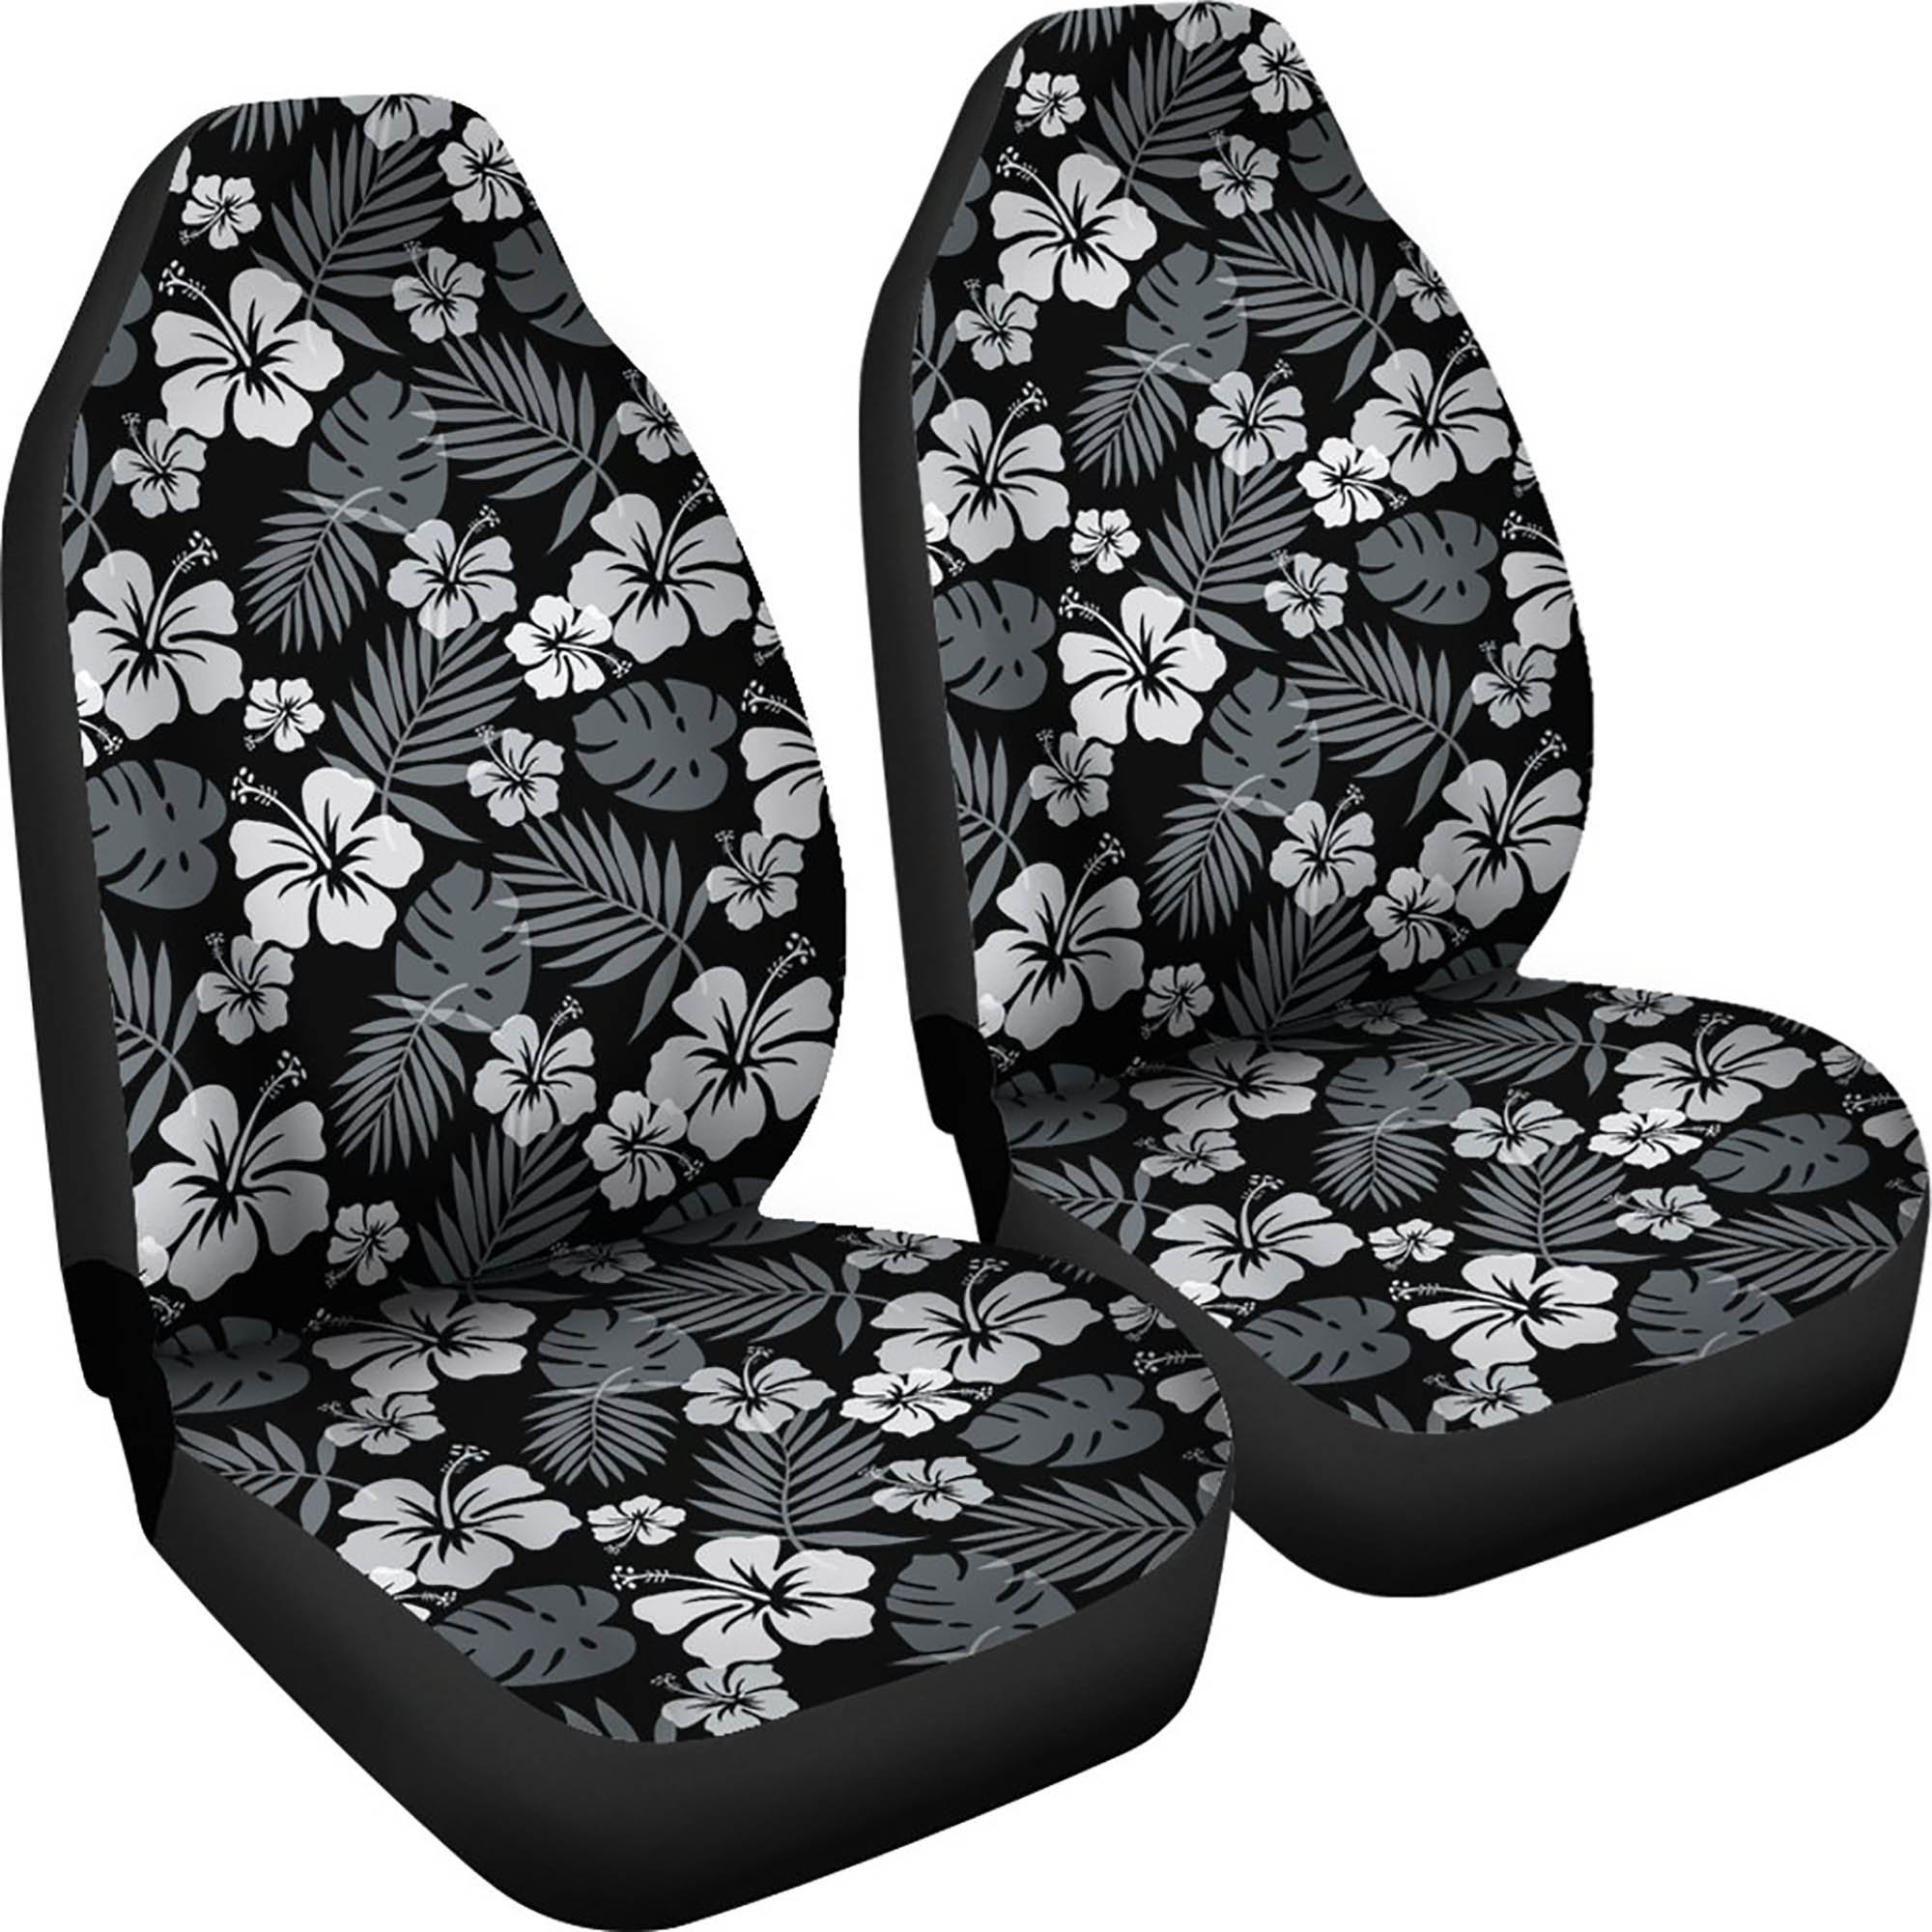 Guam Flower Hibiscus Decal Seat Covers Car Seat Universal Fit Anti-Slip Bucket Seat Protector Cushion Premium Cover for Cars Suvs Trucks 